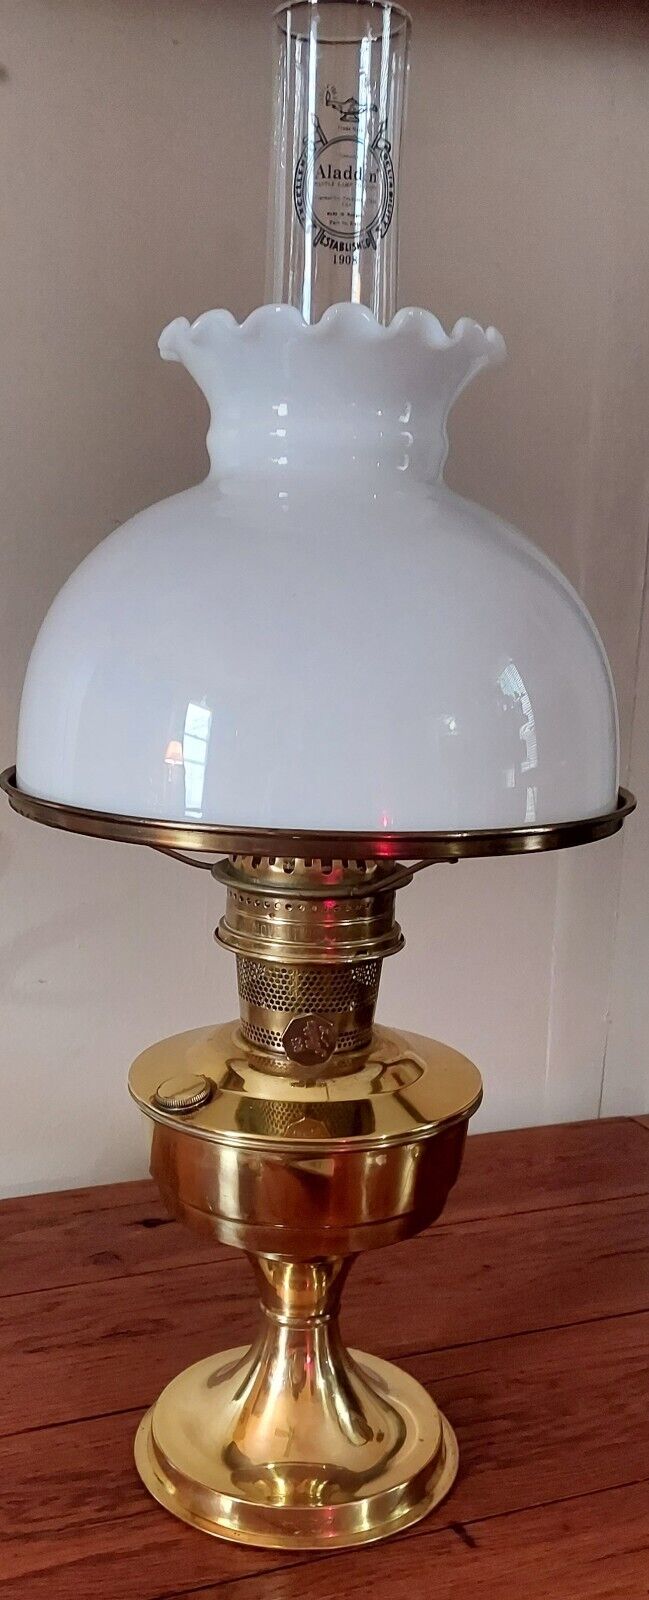 Vintage Aladdin Model 23 Brass Oil Lamp with White Glass Shade New Mantel In Box